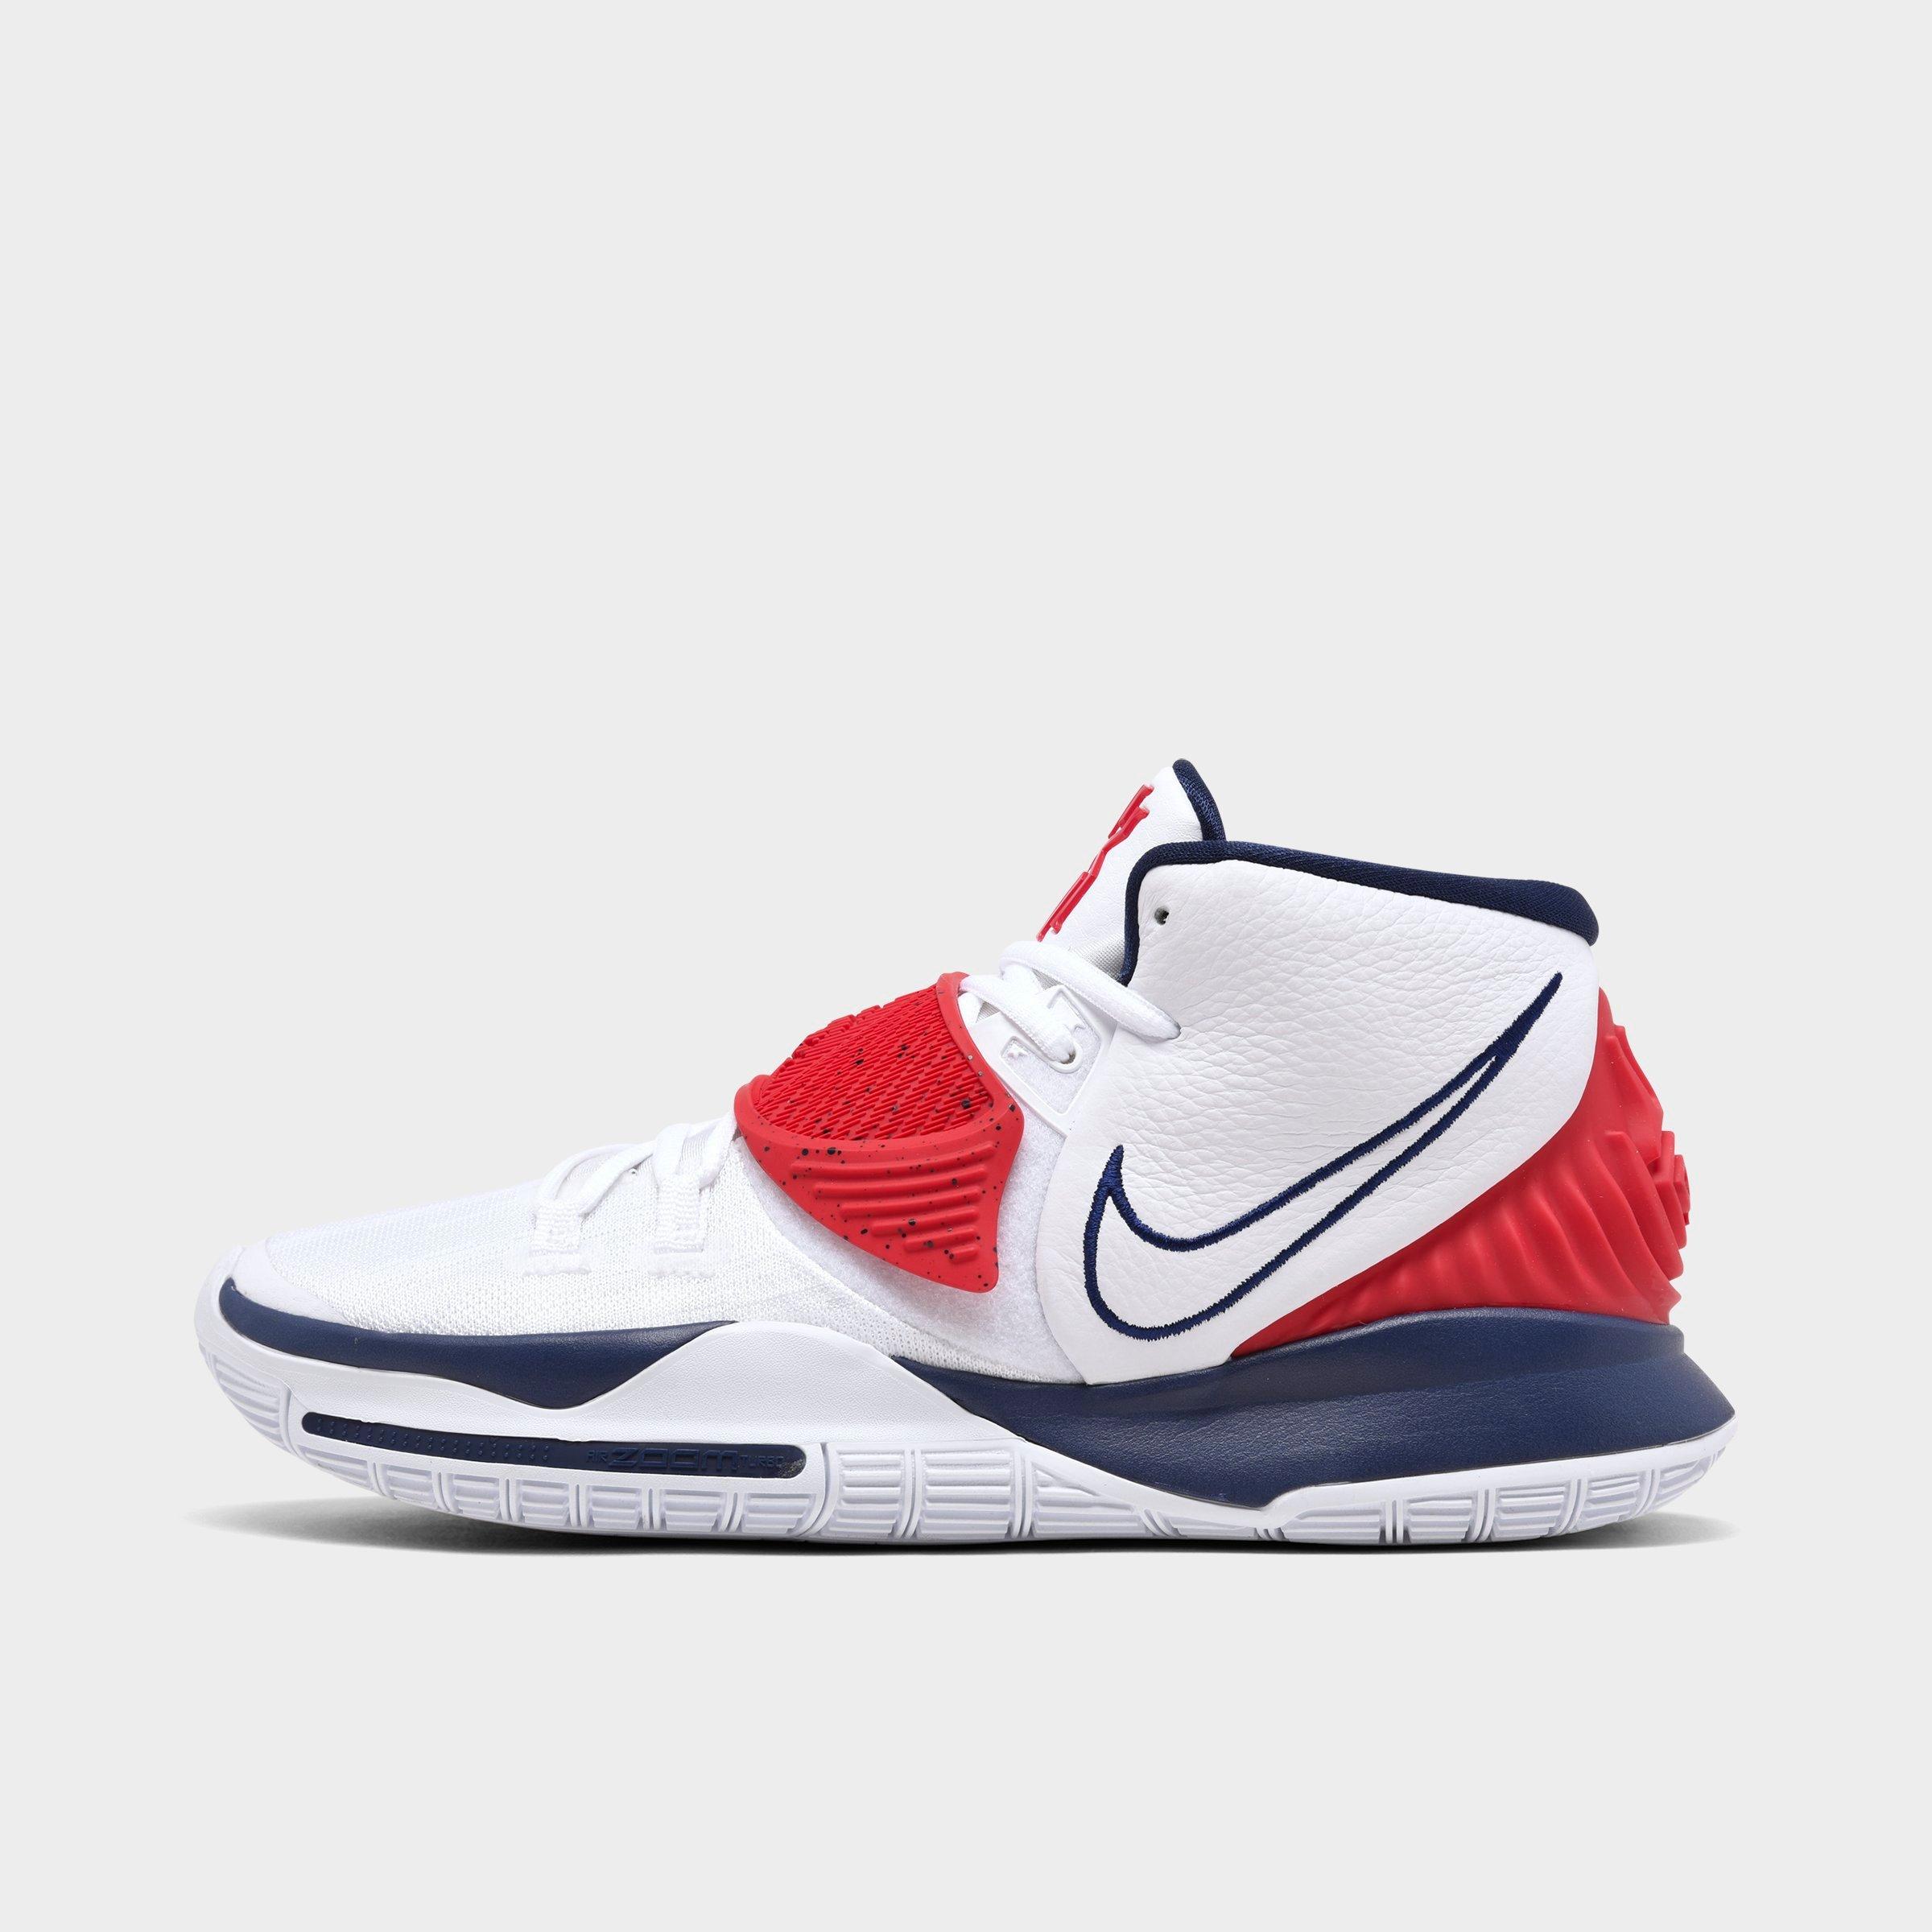 kyrie irving shoes clearance